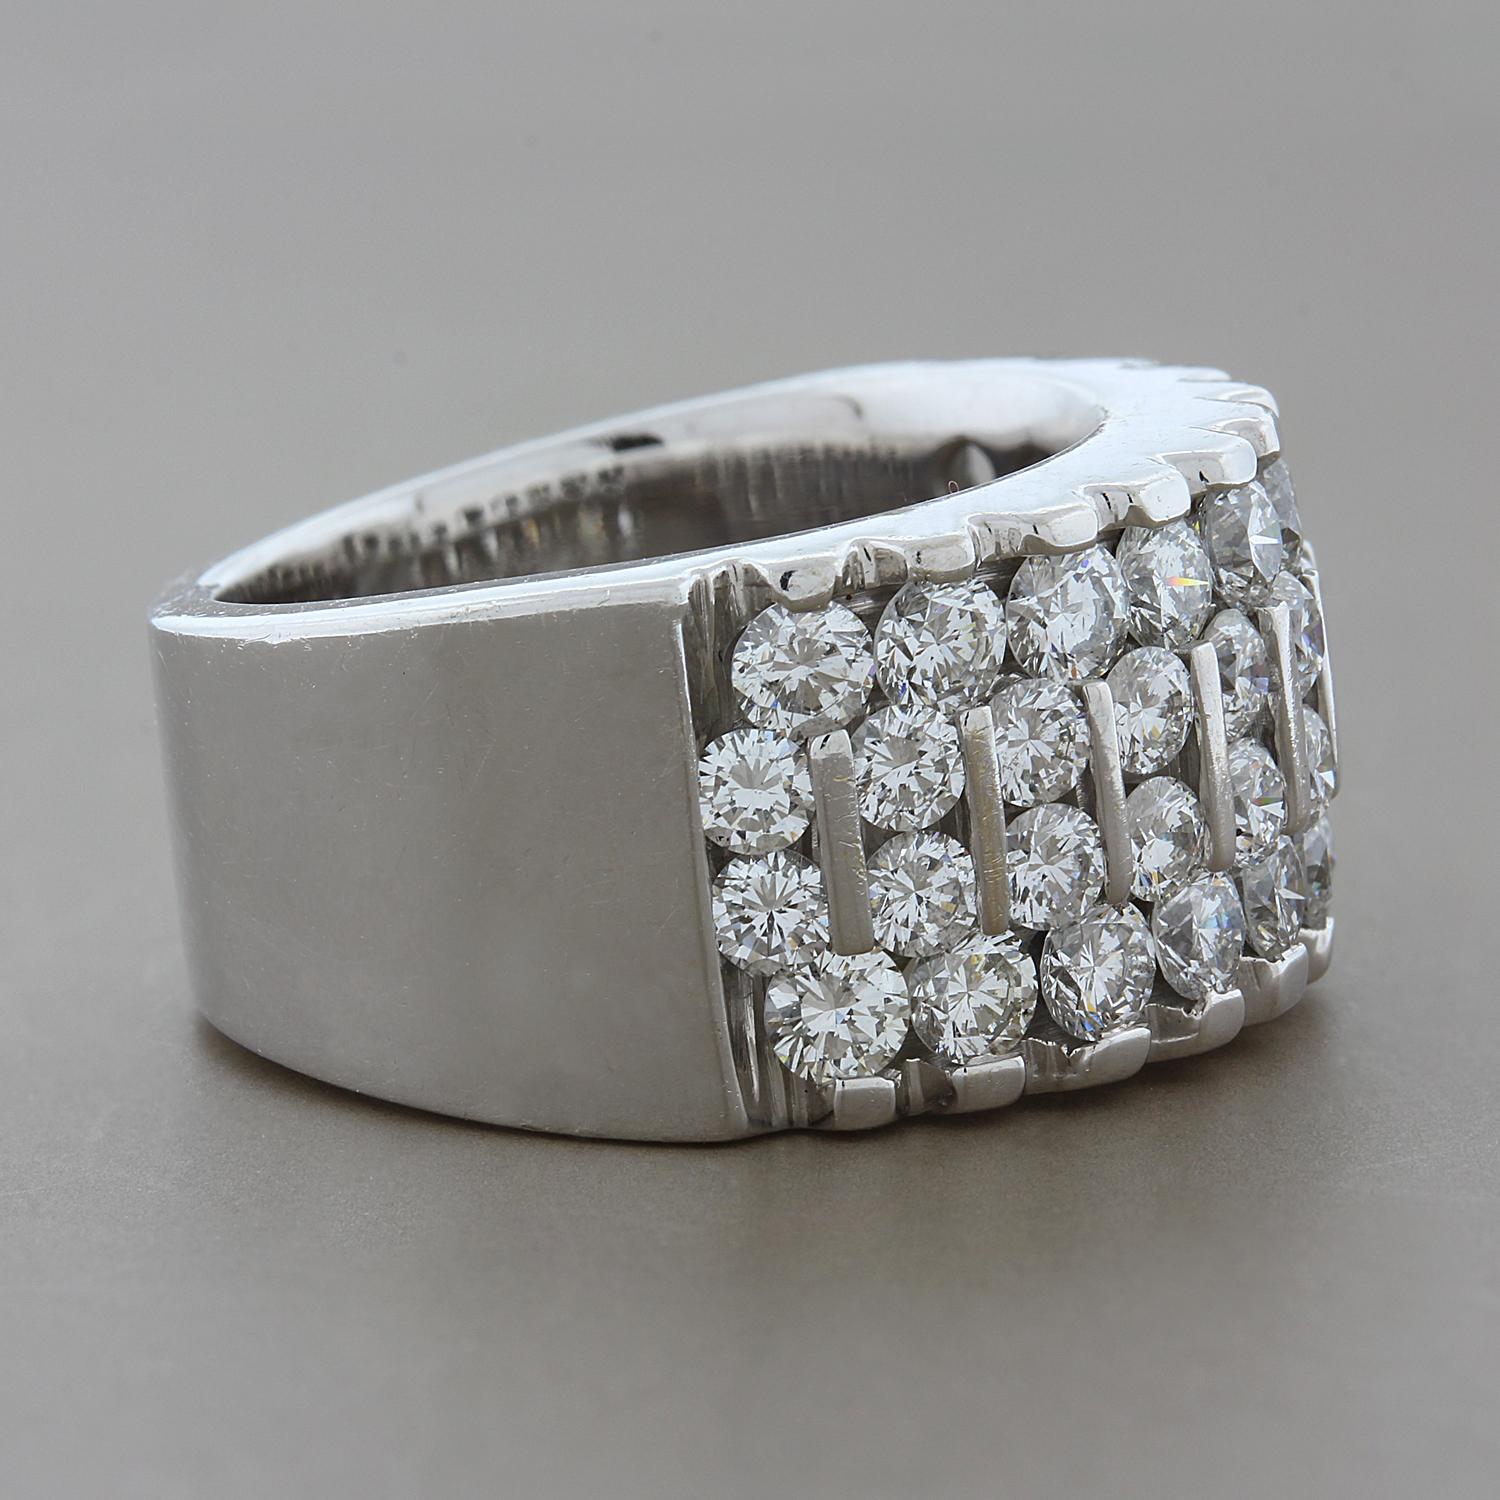 Glitz and sparkle! This band features 3.48 carats of VS quality round cut diamonds set in 18K white gold. The channel set diamonds in the center sets this band apart from the rest. Four rows of diamonds go half-circle for great comfort and allows